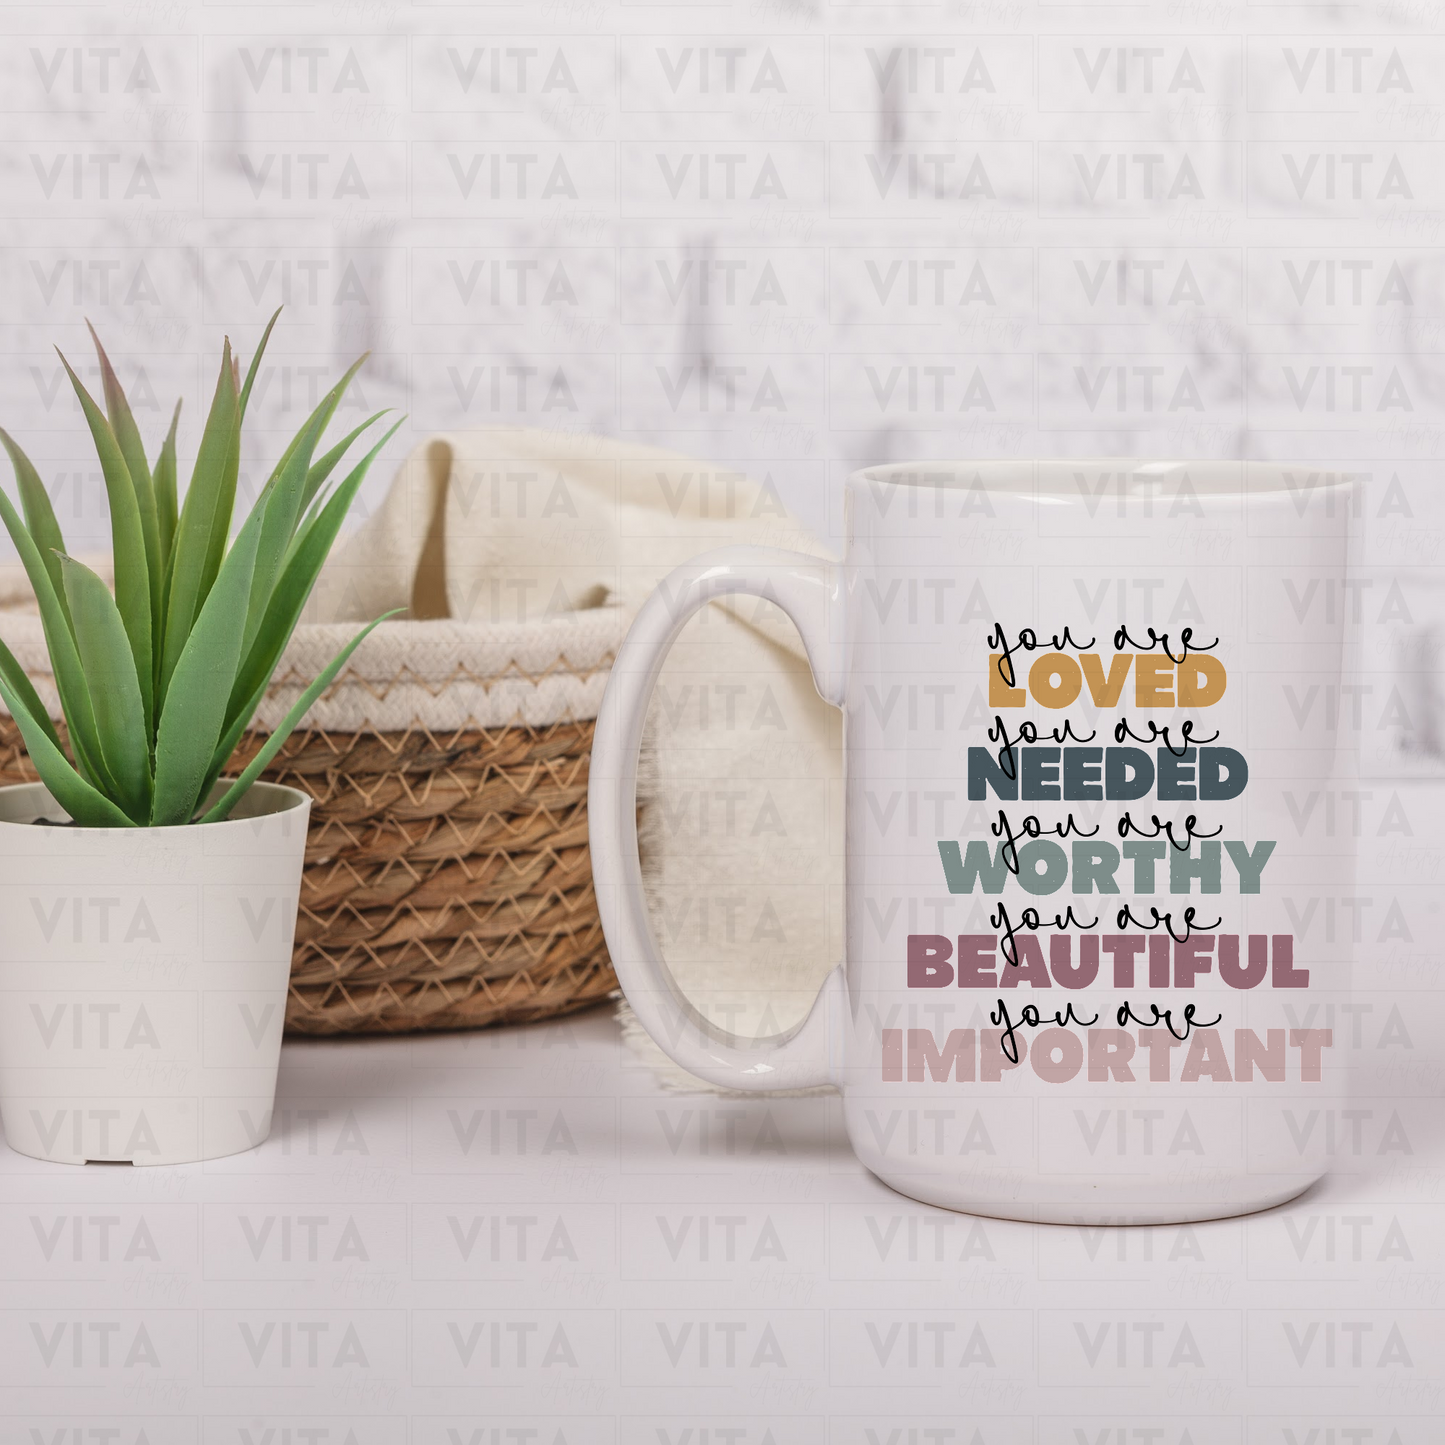 You Are Loved Needed Worthy Beautiful Important - Mental Health/Uplifting Ceramic Mug